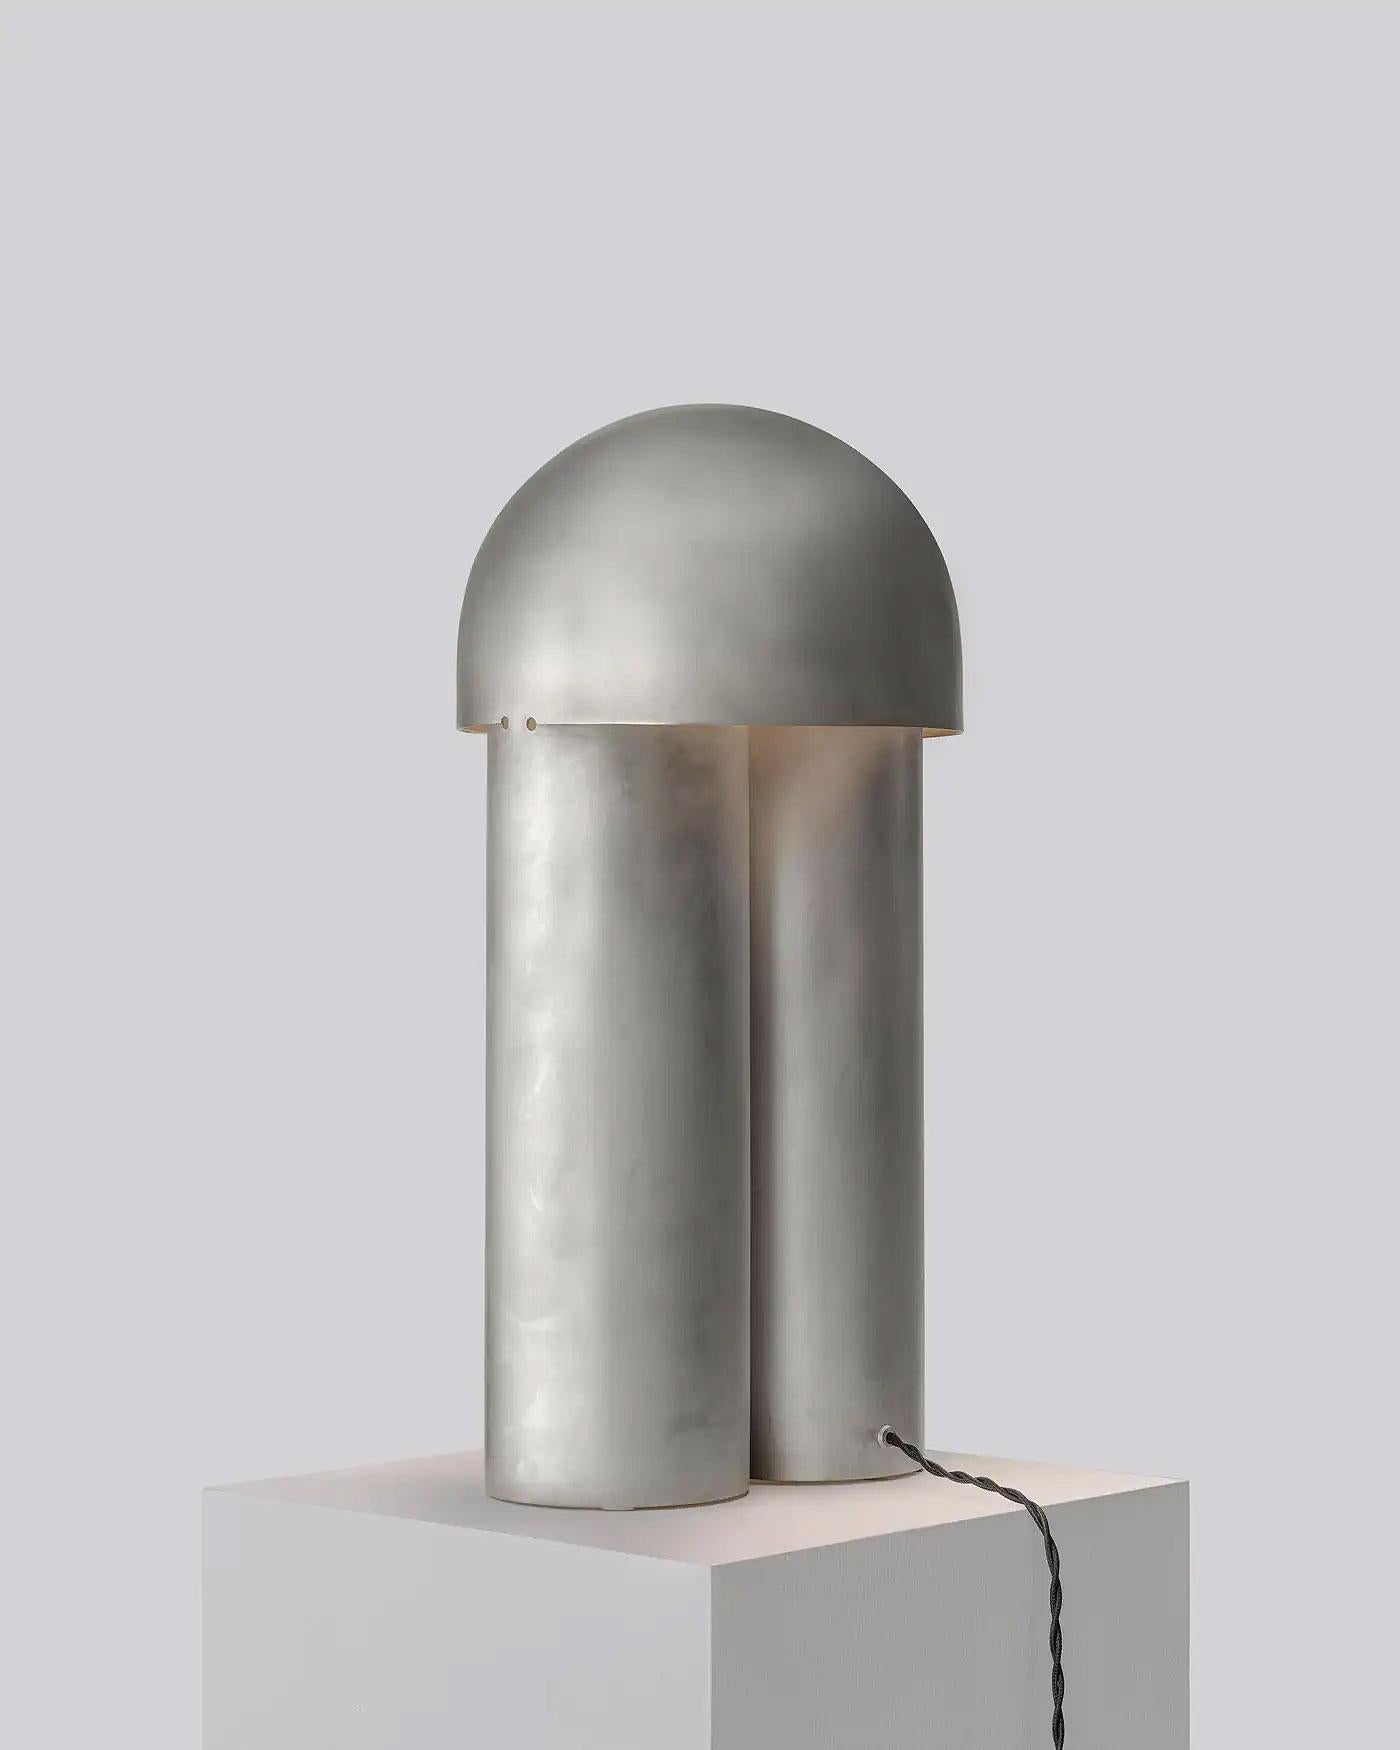 Contemporary Silvered Brass Sculpted Table Lamp, Monolith Large by Paul Matter

The Monolith lamp is an exercise in reduction. Sculpted out of a single body with the help of simple scores and folds, the lamps geometry, surface texture and finish of